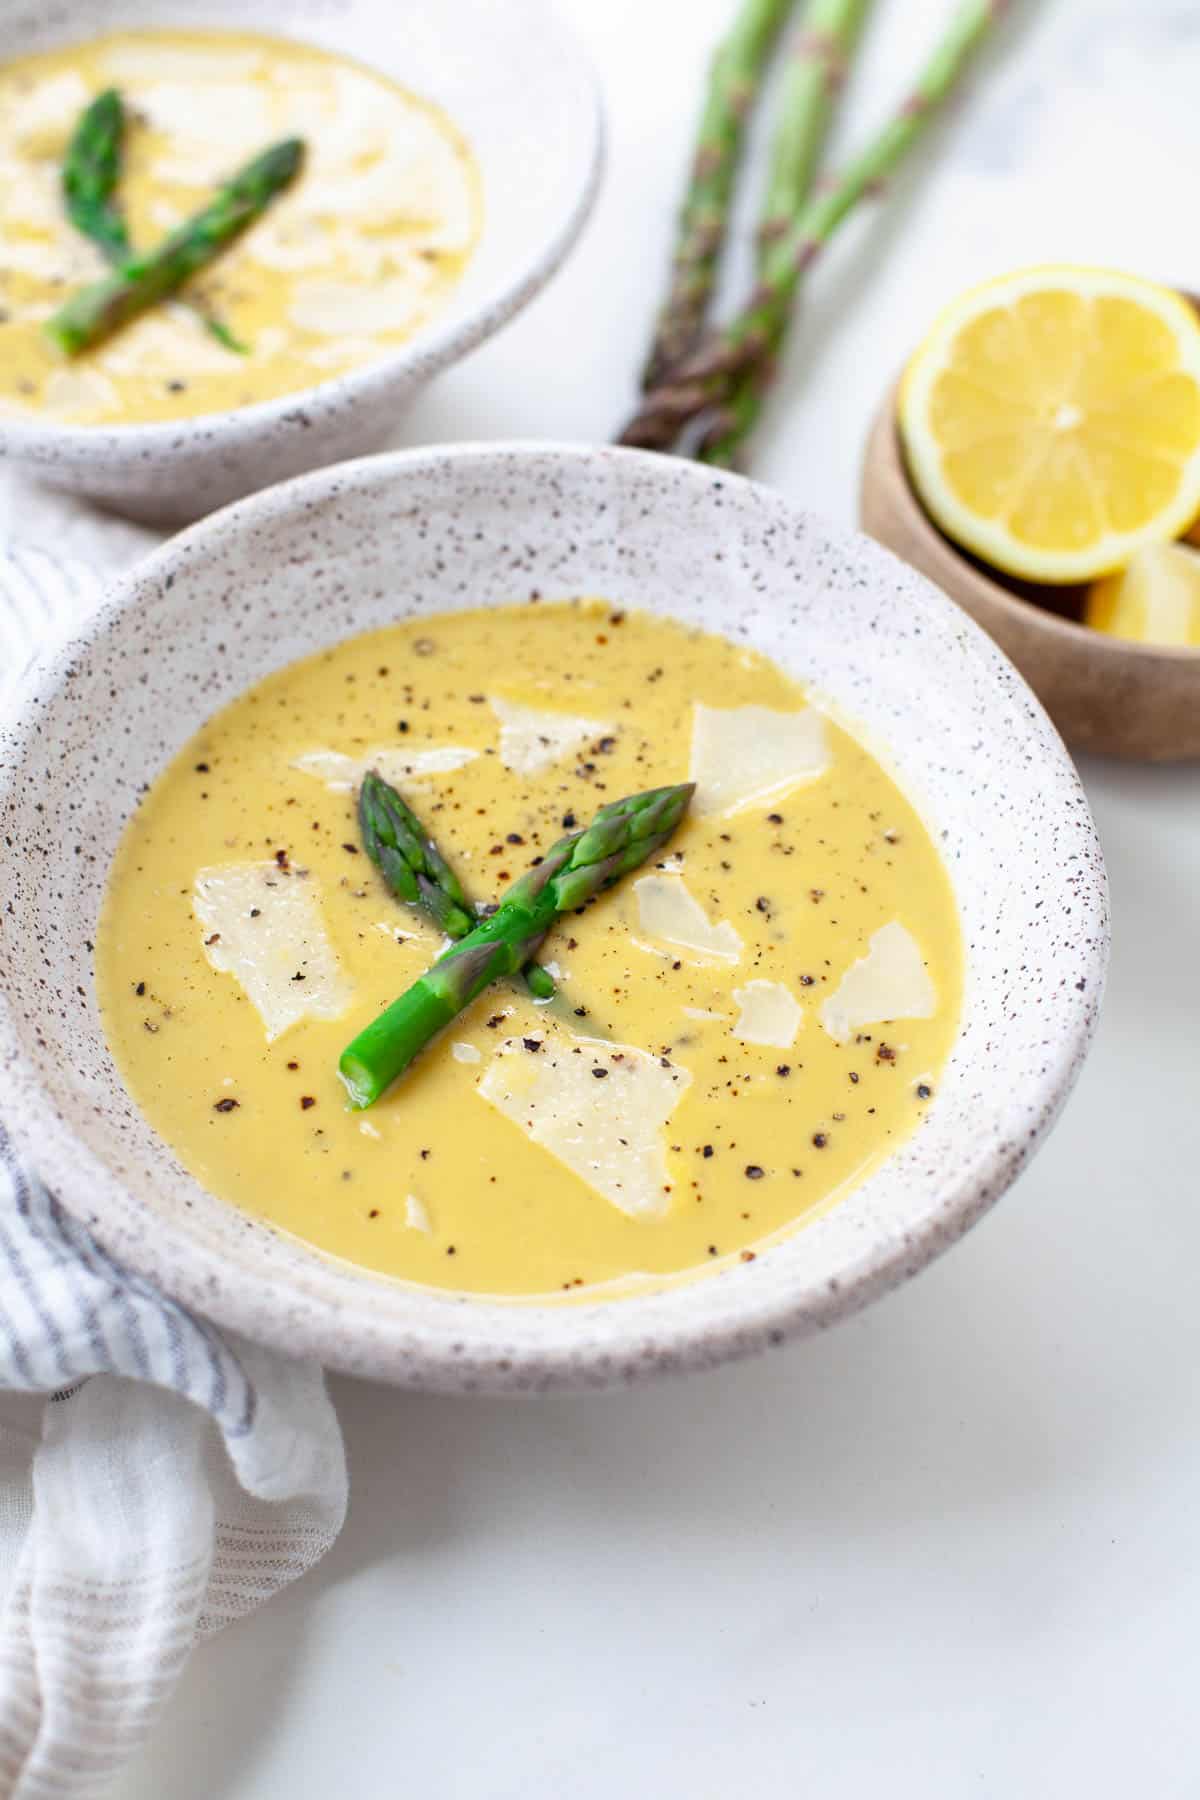 cream of asparagus soup in a white speckled bowl with asparagus pieces and lemons